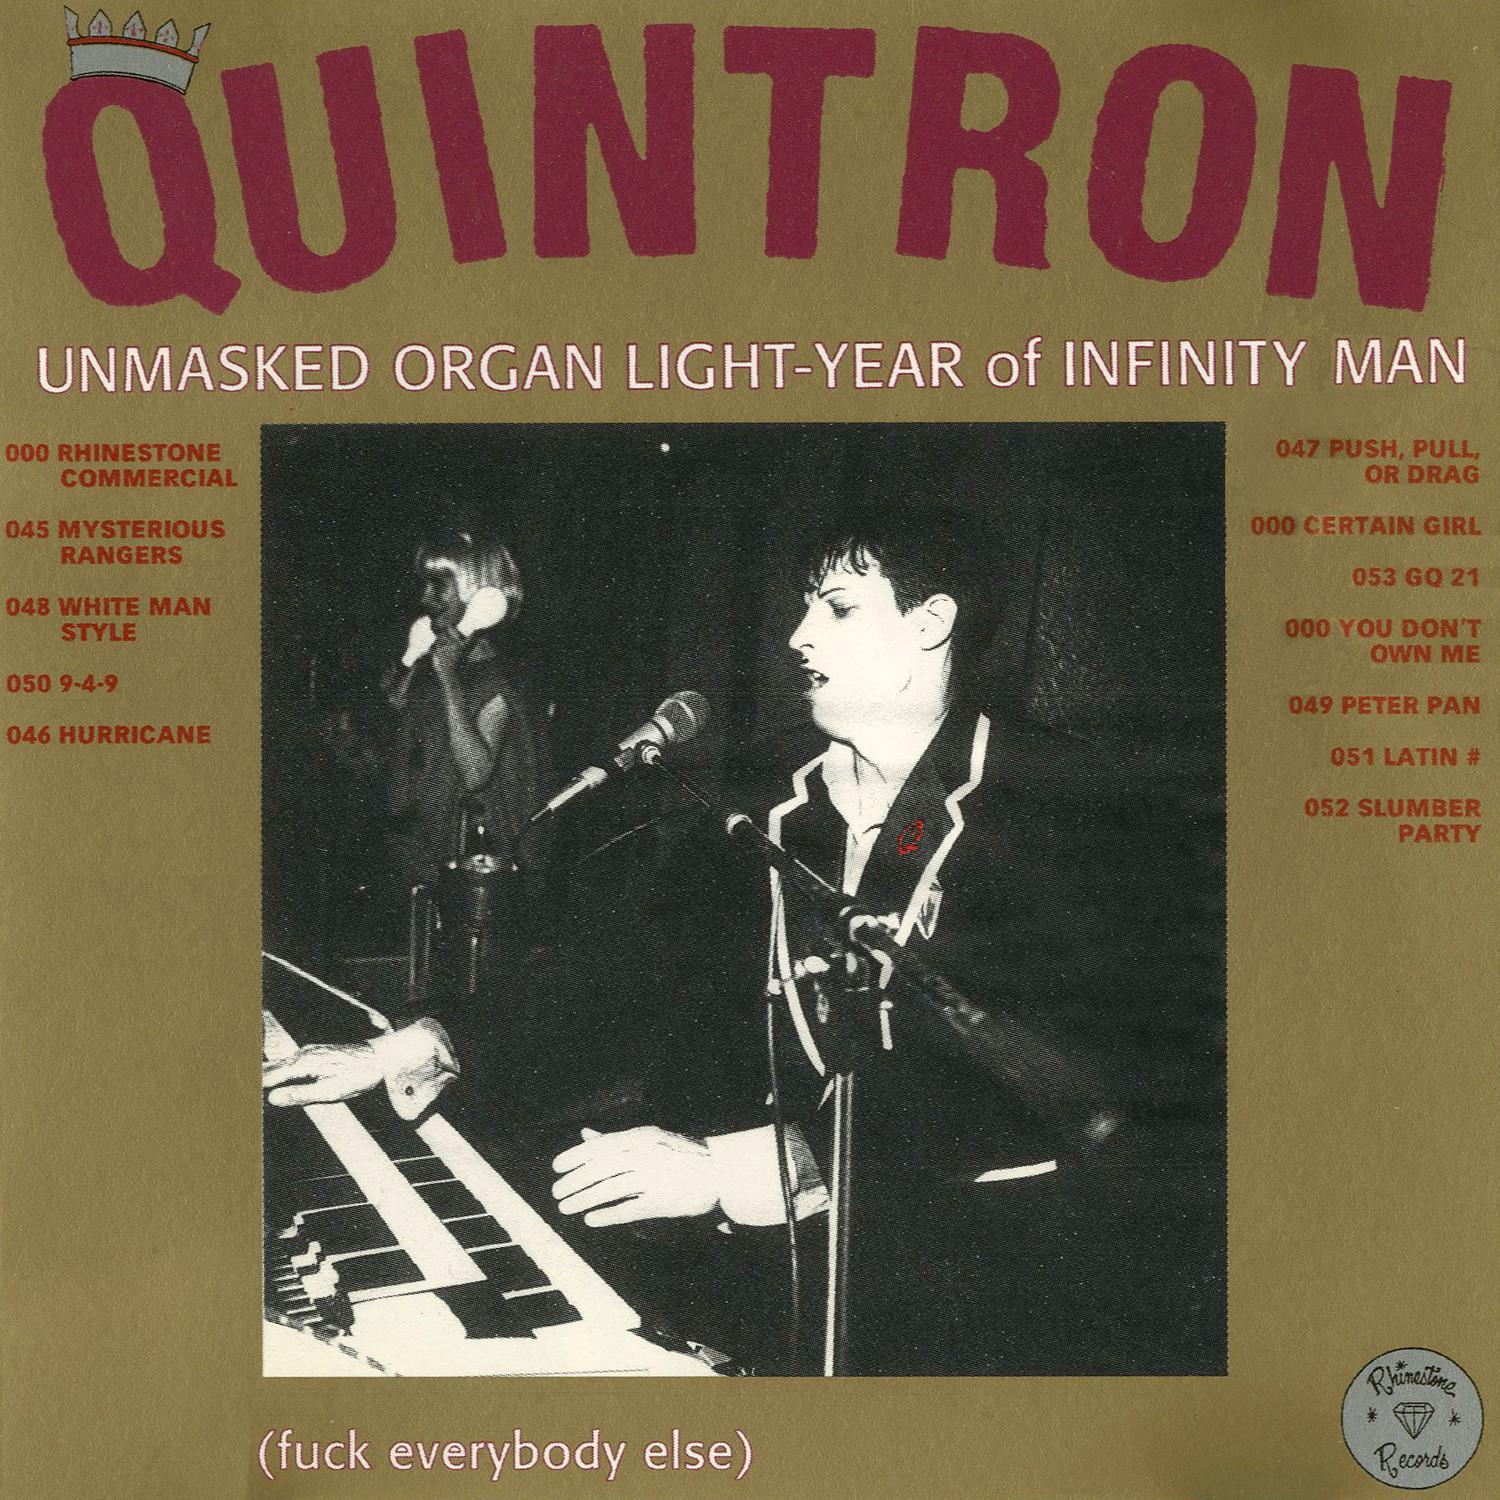 The Unmasked Organ Light-Year of Infinity Man (**** Everybody Else)